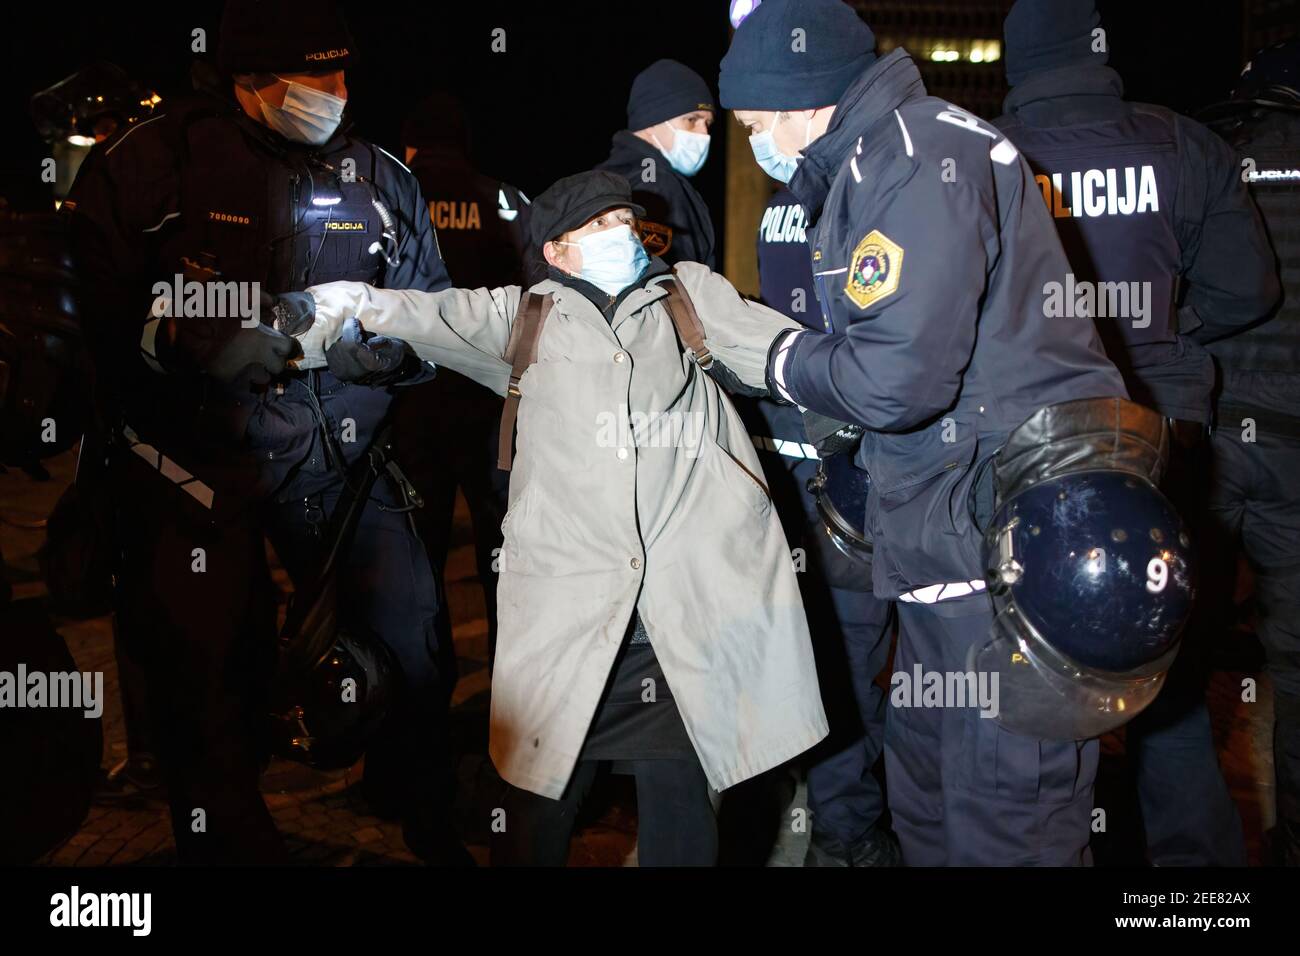 Policemen arrest a woman during an anti-government protest in Ljubljana. The protests against Slovenian Prime Minister Janez Jansa continued on the day that the National Assembly debated a motion of no confidence in the government. The no-confidence vote was initiated by the opposition that accuses the government of authoritarianism. Stock Photo